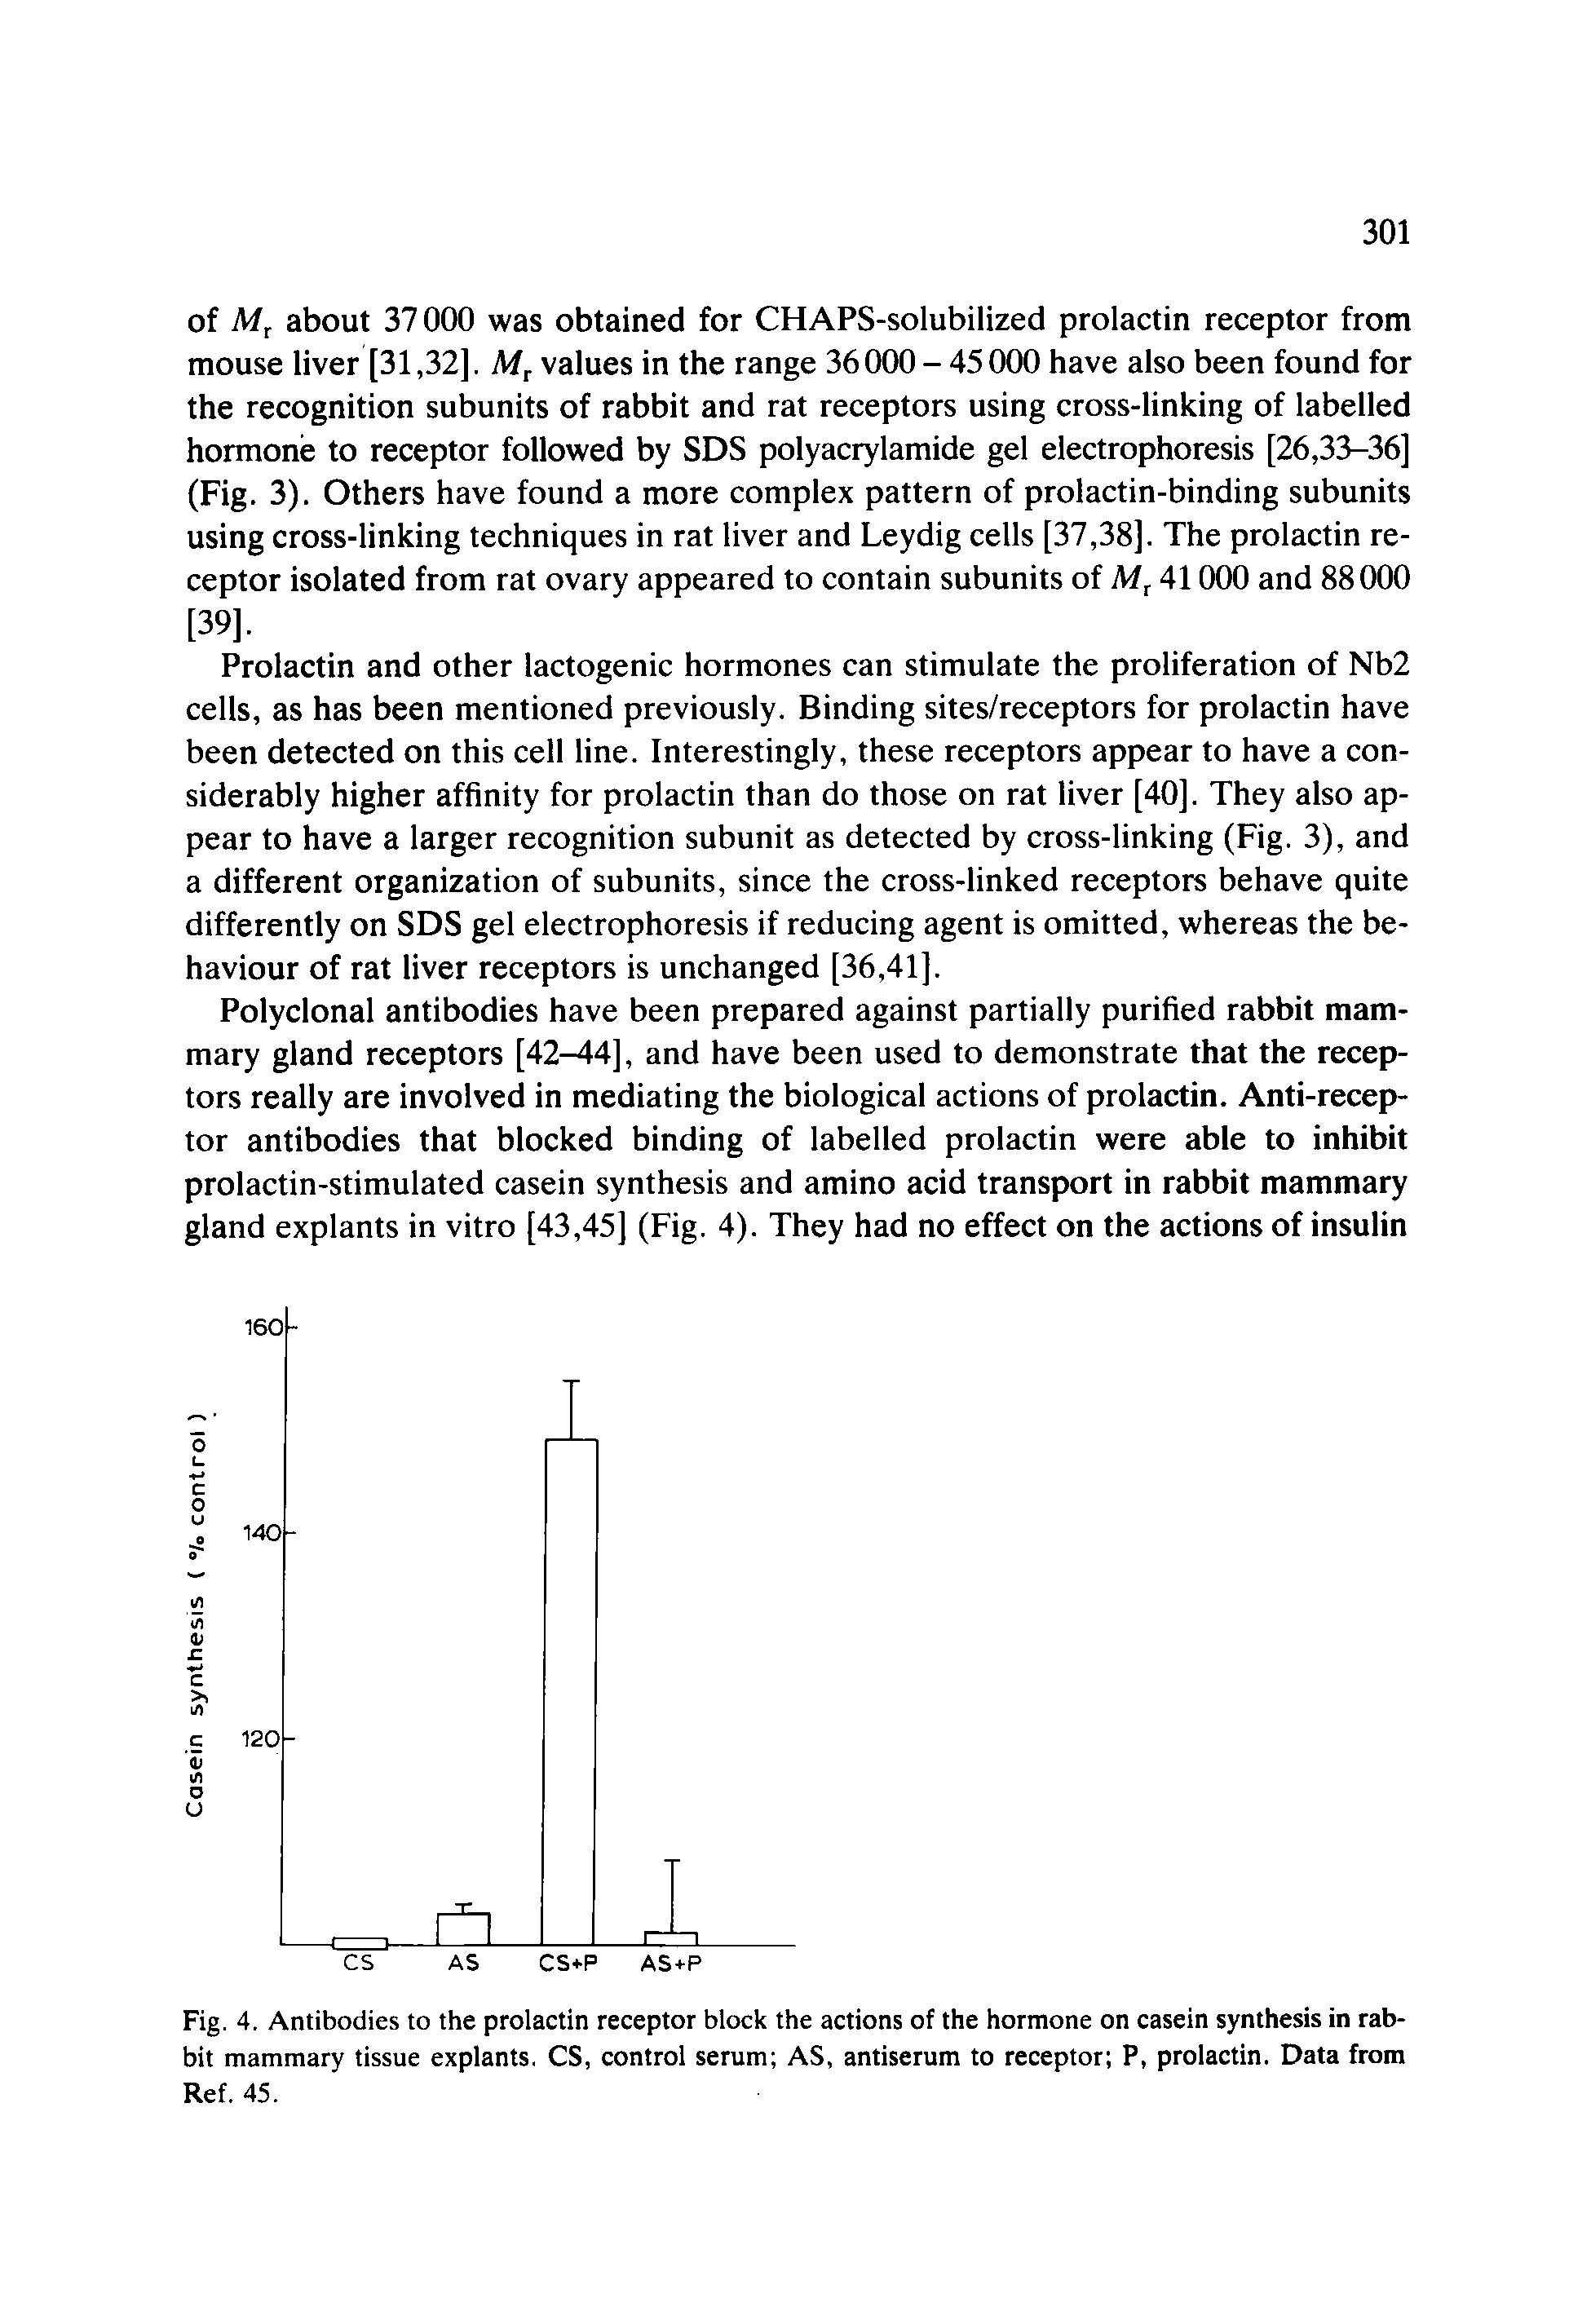 Fig. 4. Antibodies to the prolactin receptor block the actions of the hormone on casein synthesis in rabbit mammary tissue explants. CS, control serum AS, antiserum to receptor P, prolactin. Data from Ref. 45.